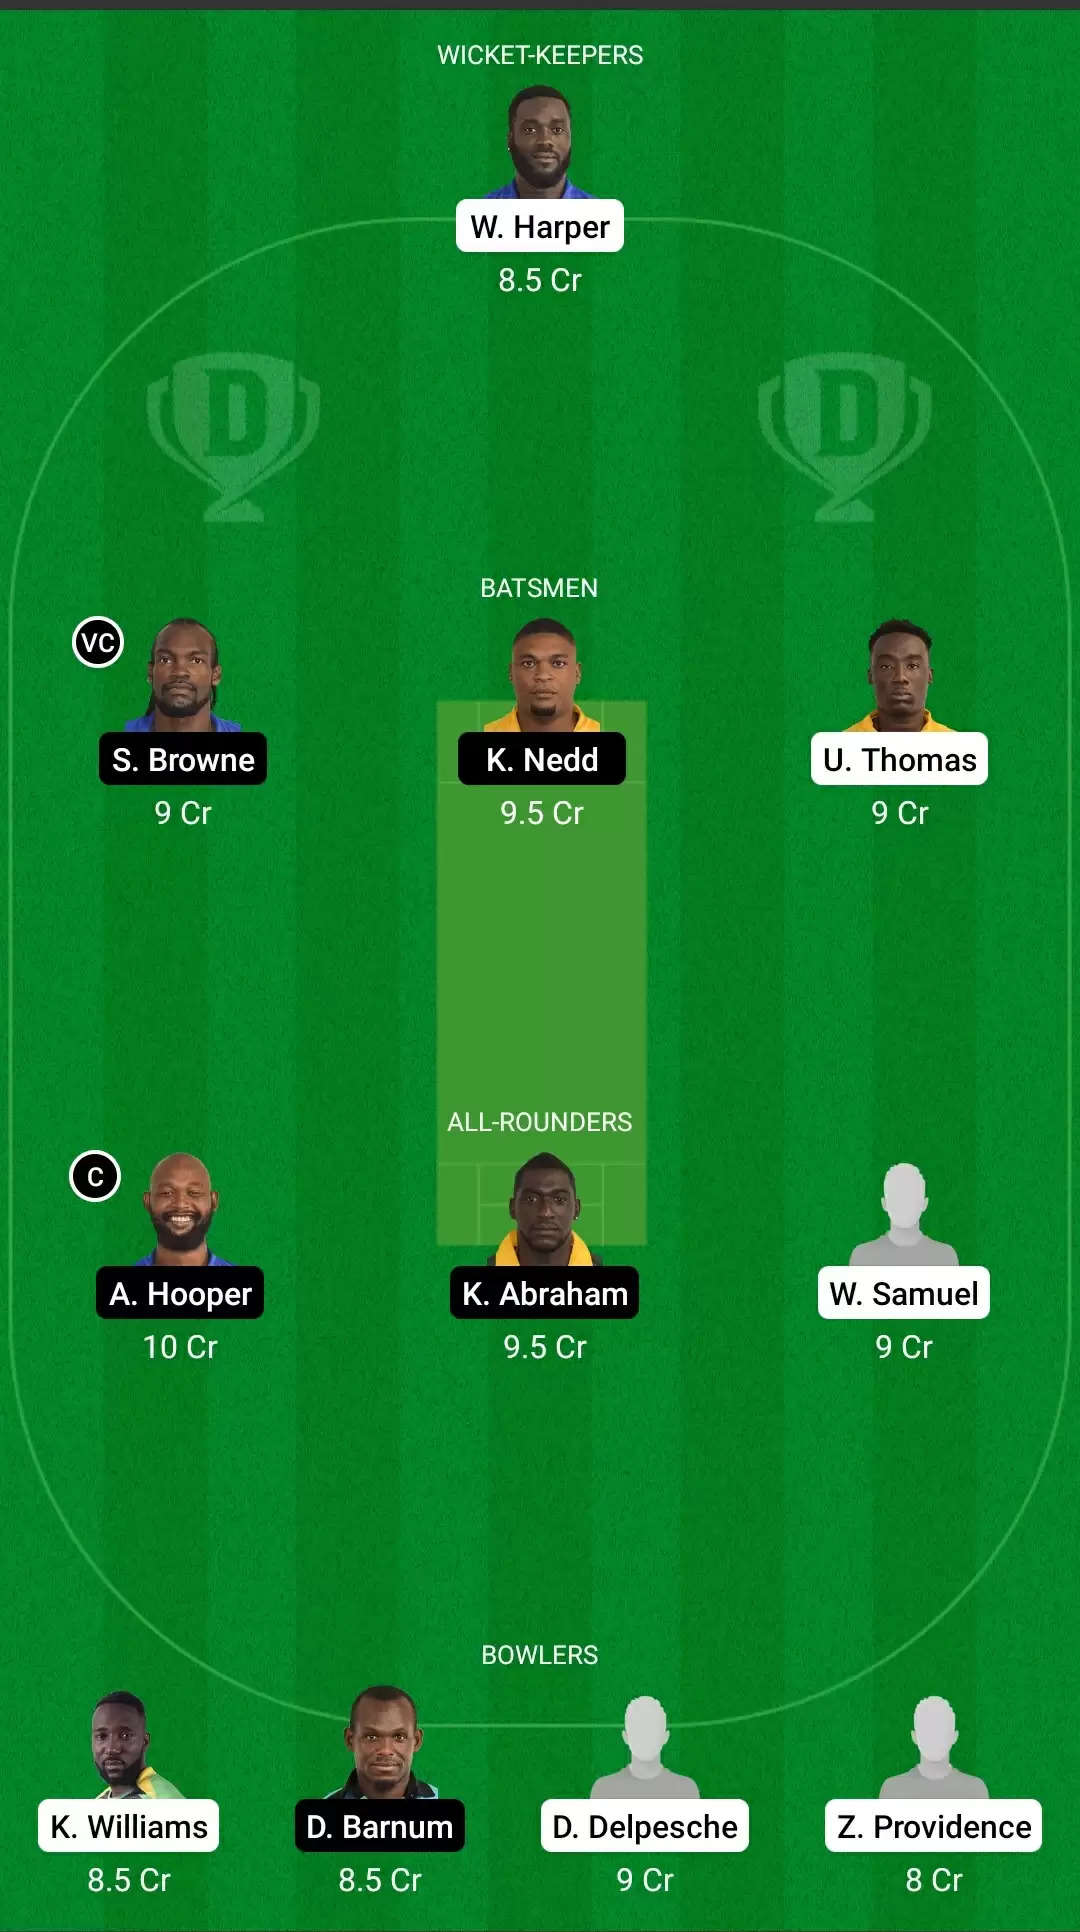 Vincy Premier League 2021, Match 10: BGR vs GRD Dream11 Prediction, Fantasy Cricket Tips, Team, Playing 11, Pitch Report, Weather Conditions and Injury Update